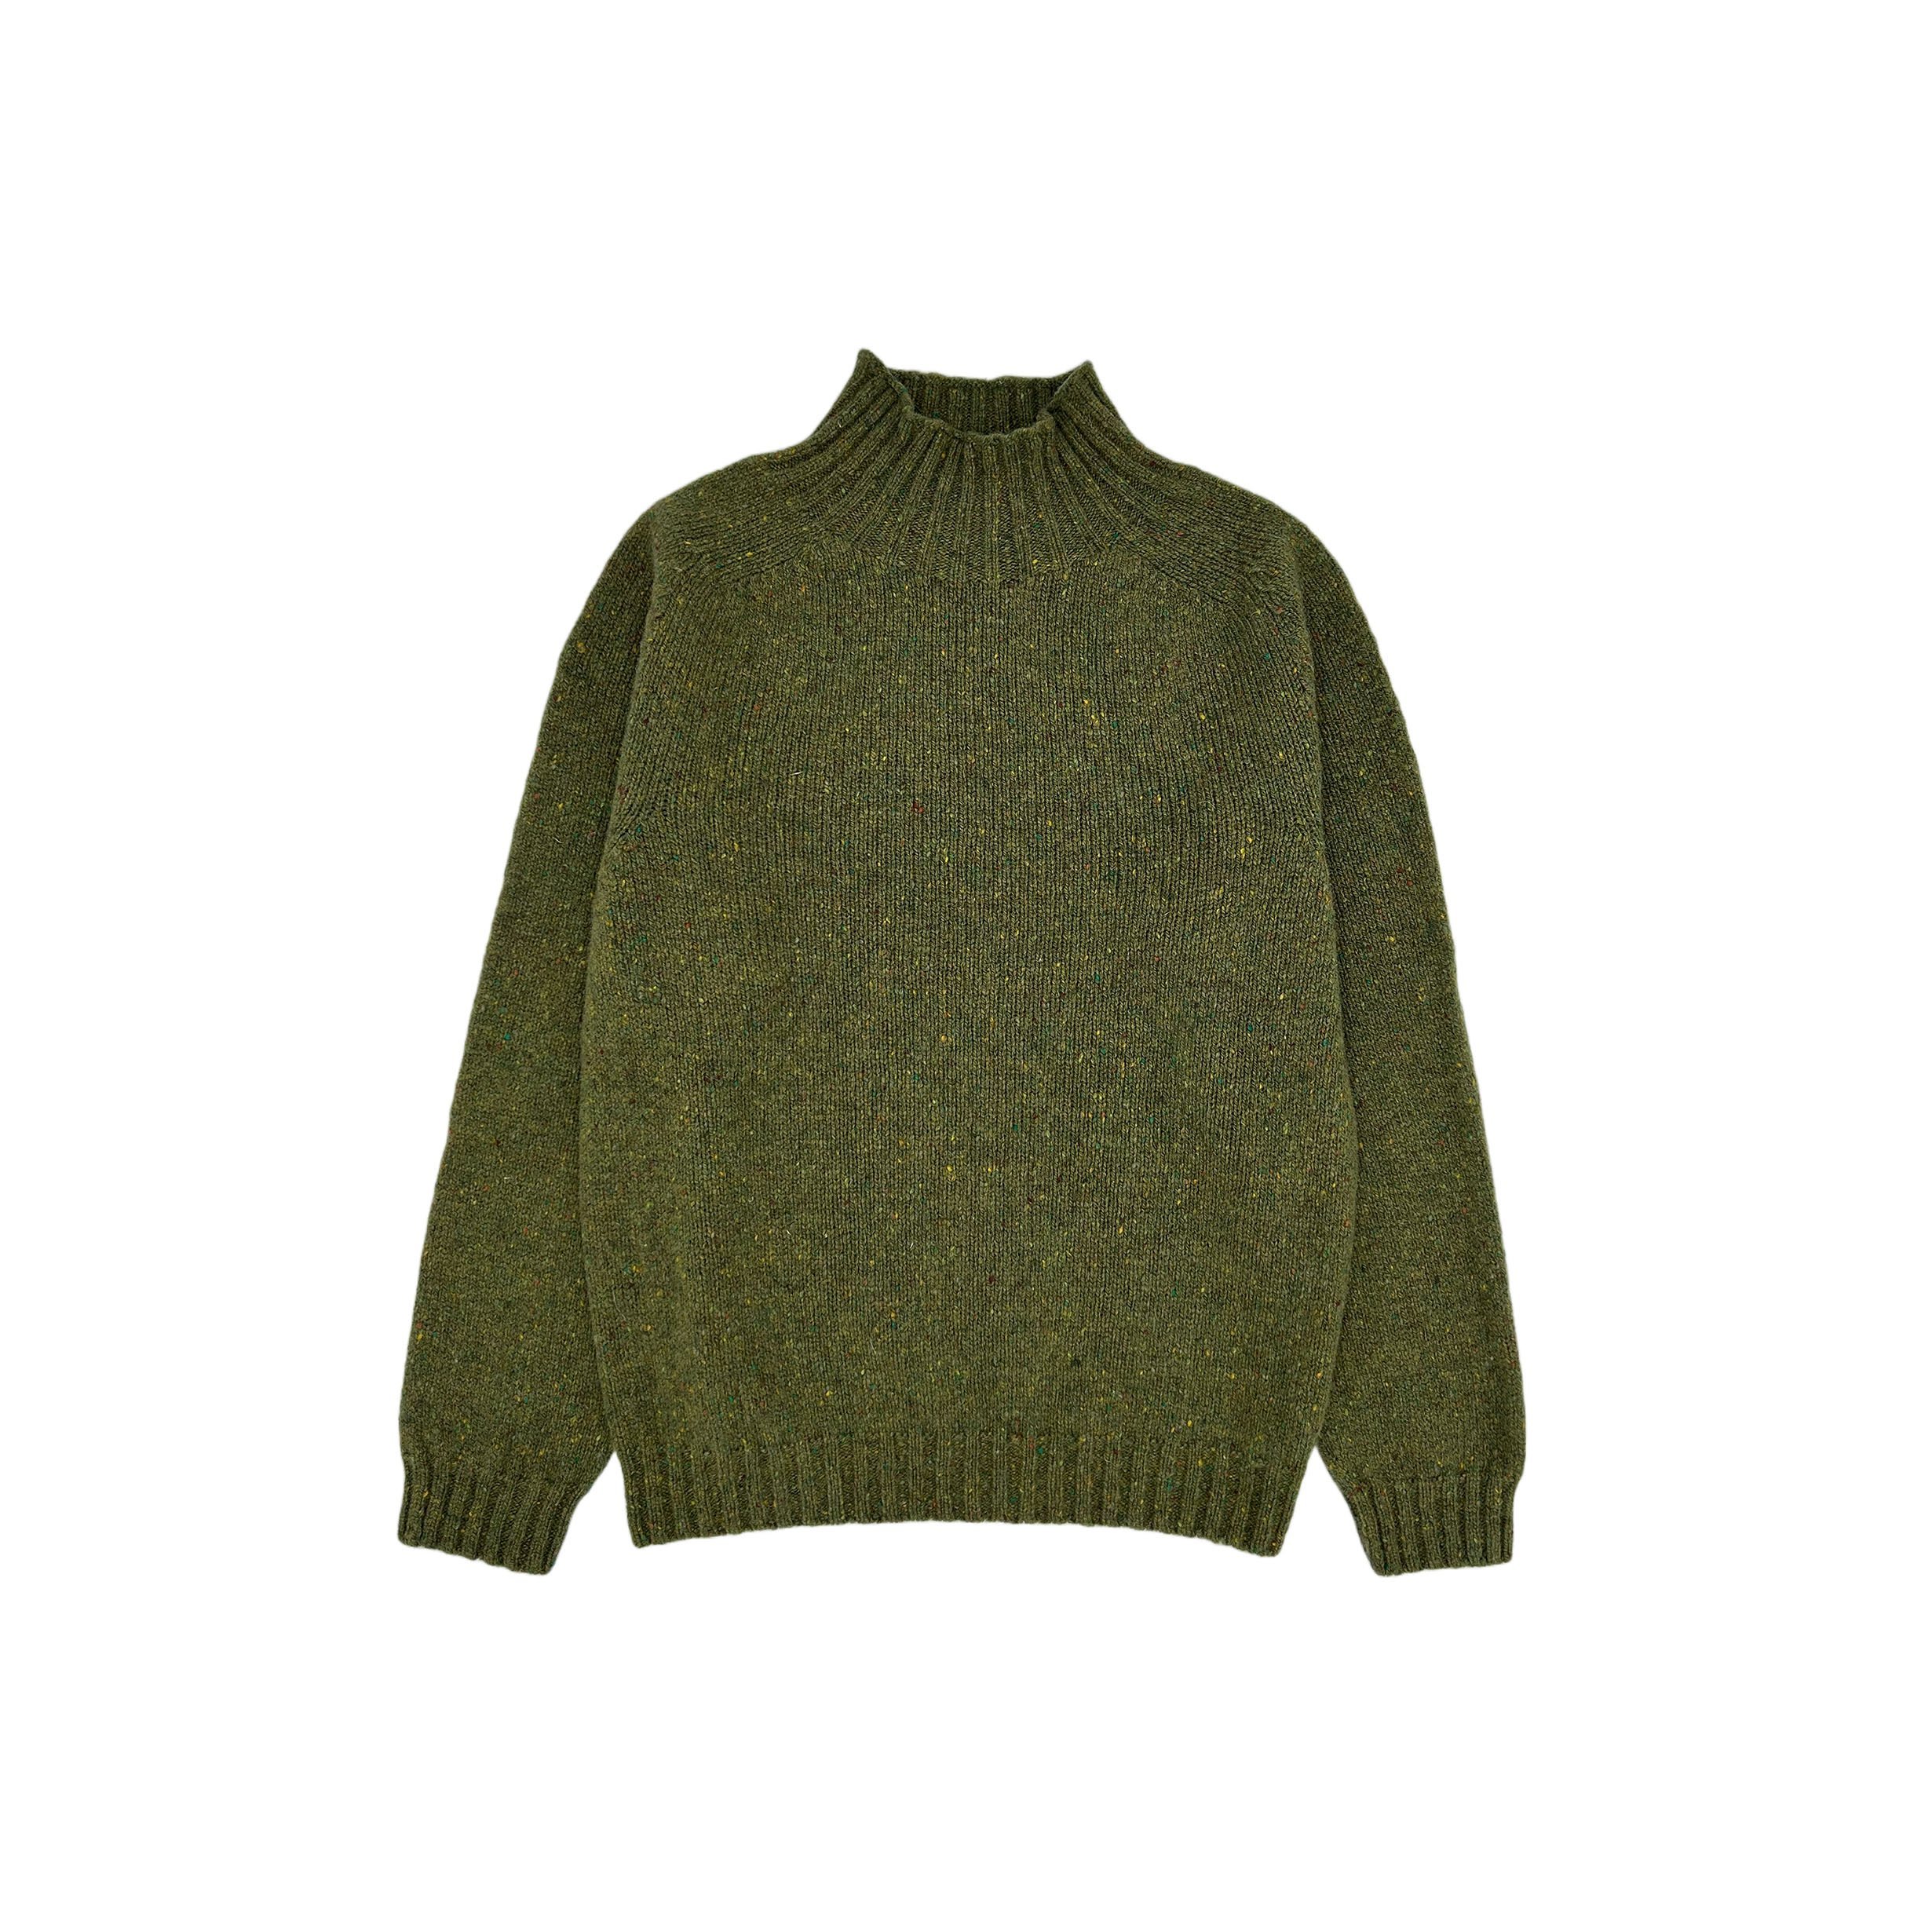 An image of Funnel Neck Glenugie Nep Womens Jumper - 4 Colours - Small/Raasay Green